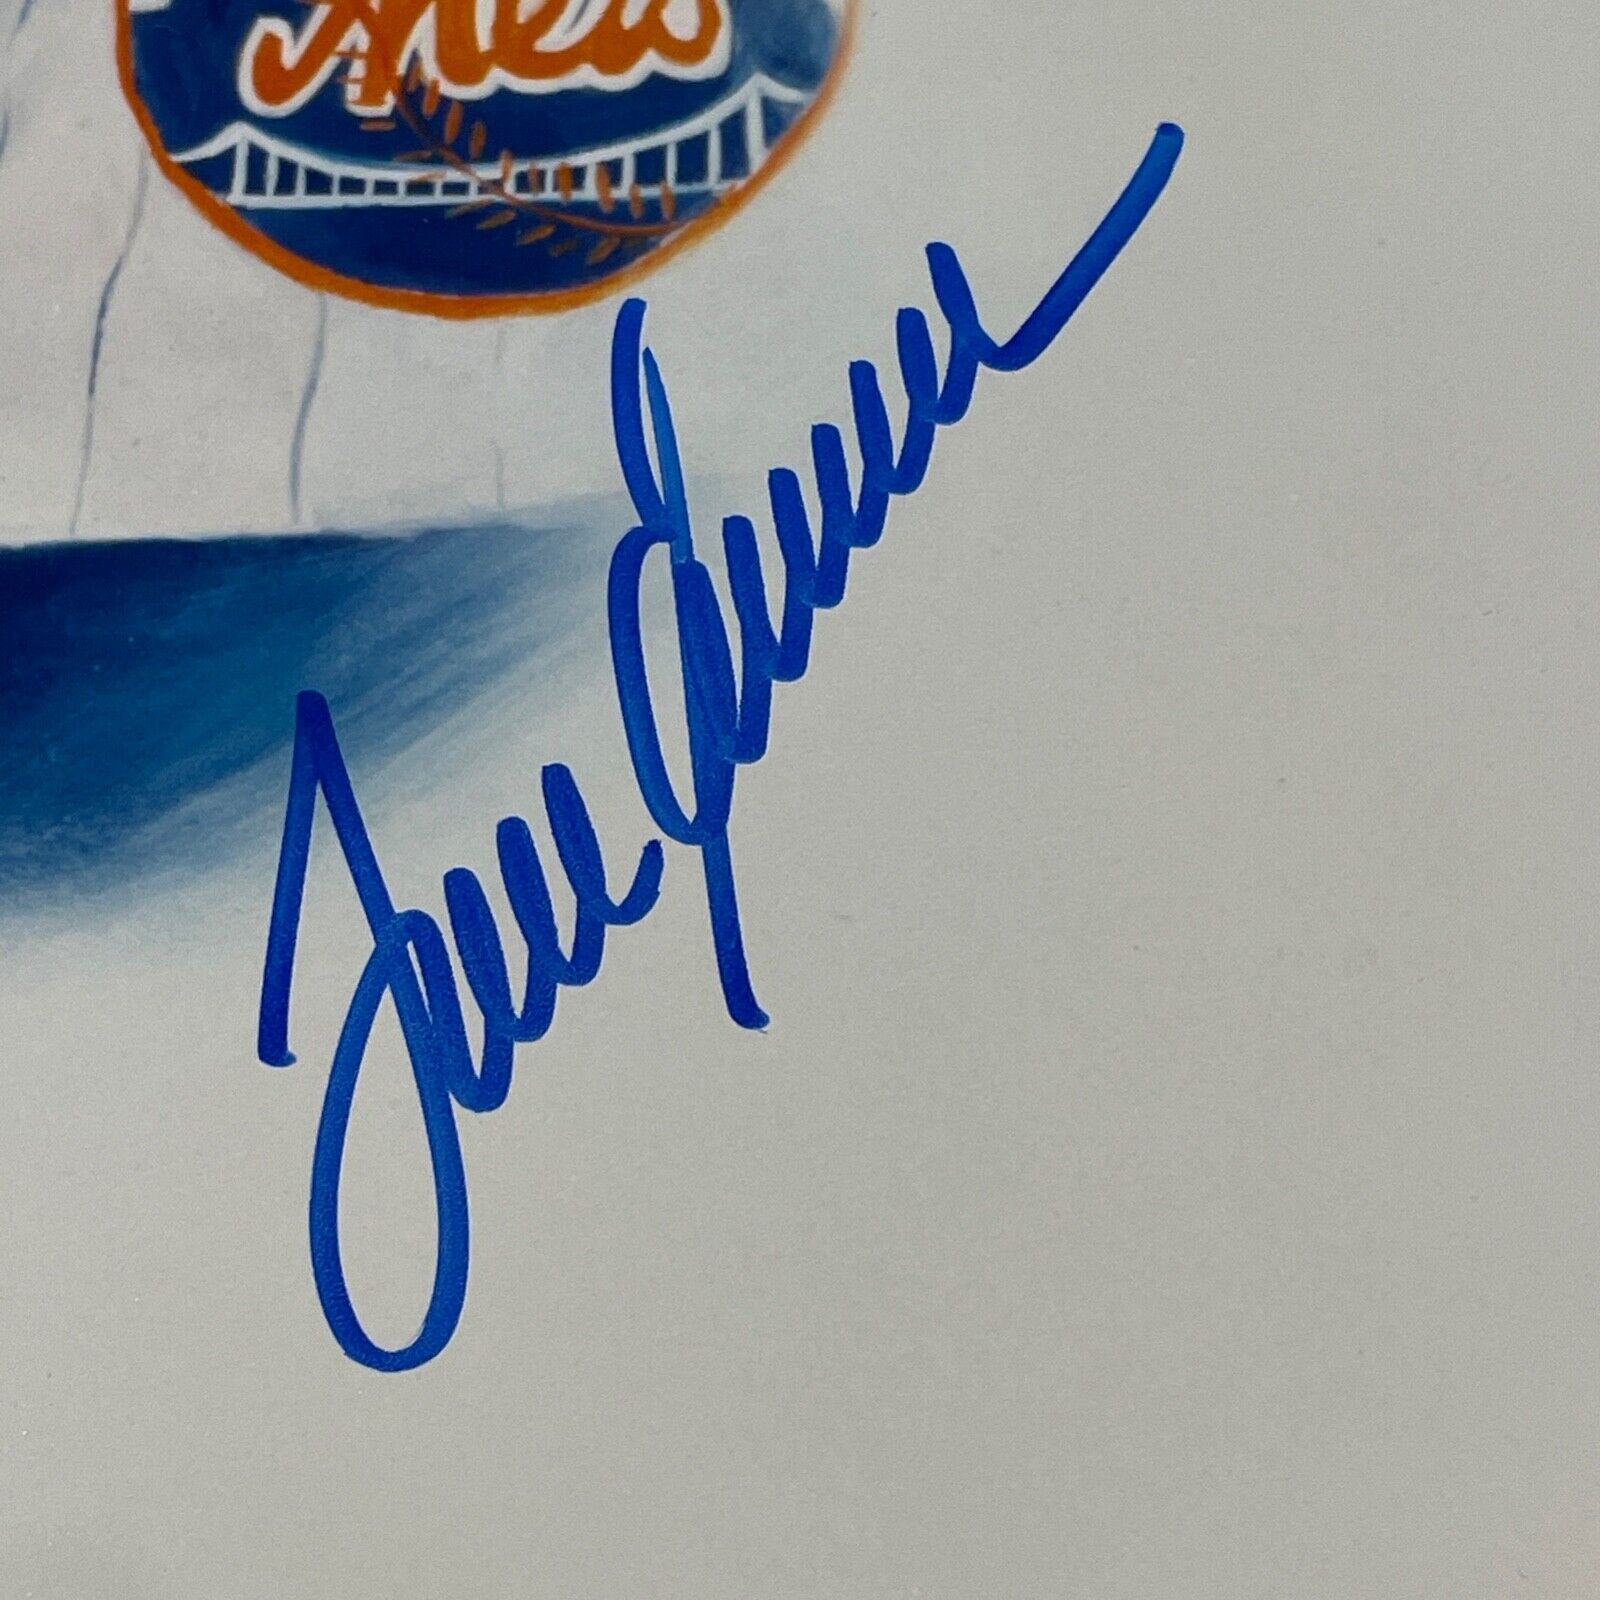 Tom Seaver Signed 14x10 Limited Edition of 311 Poster. New York Mets. JSA